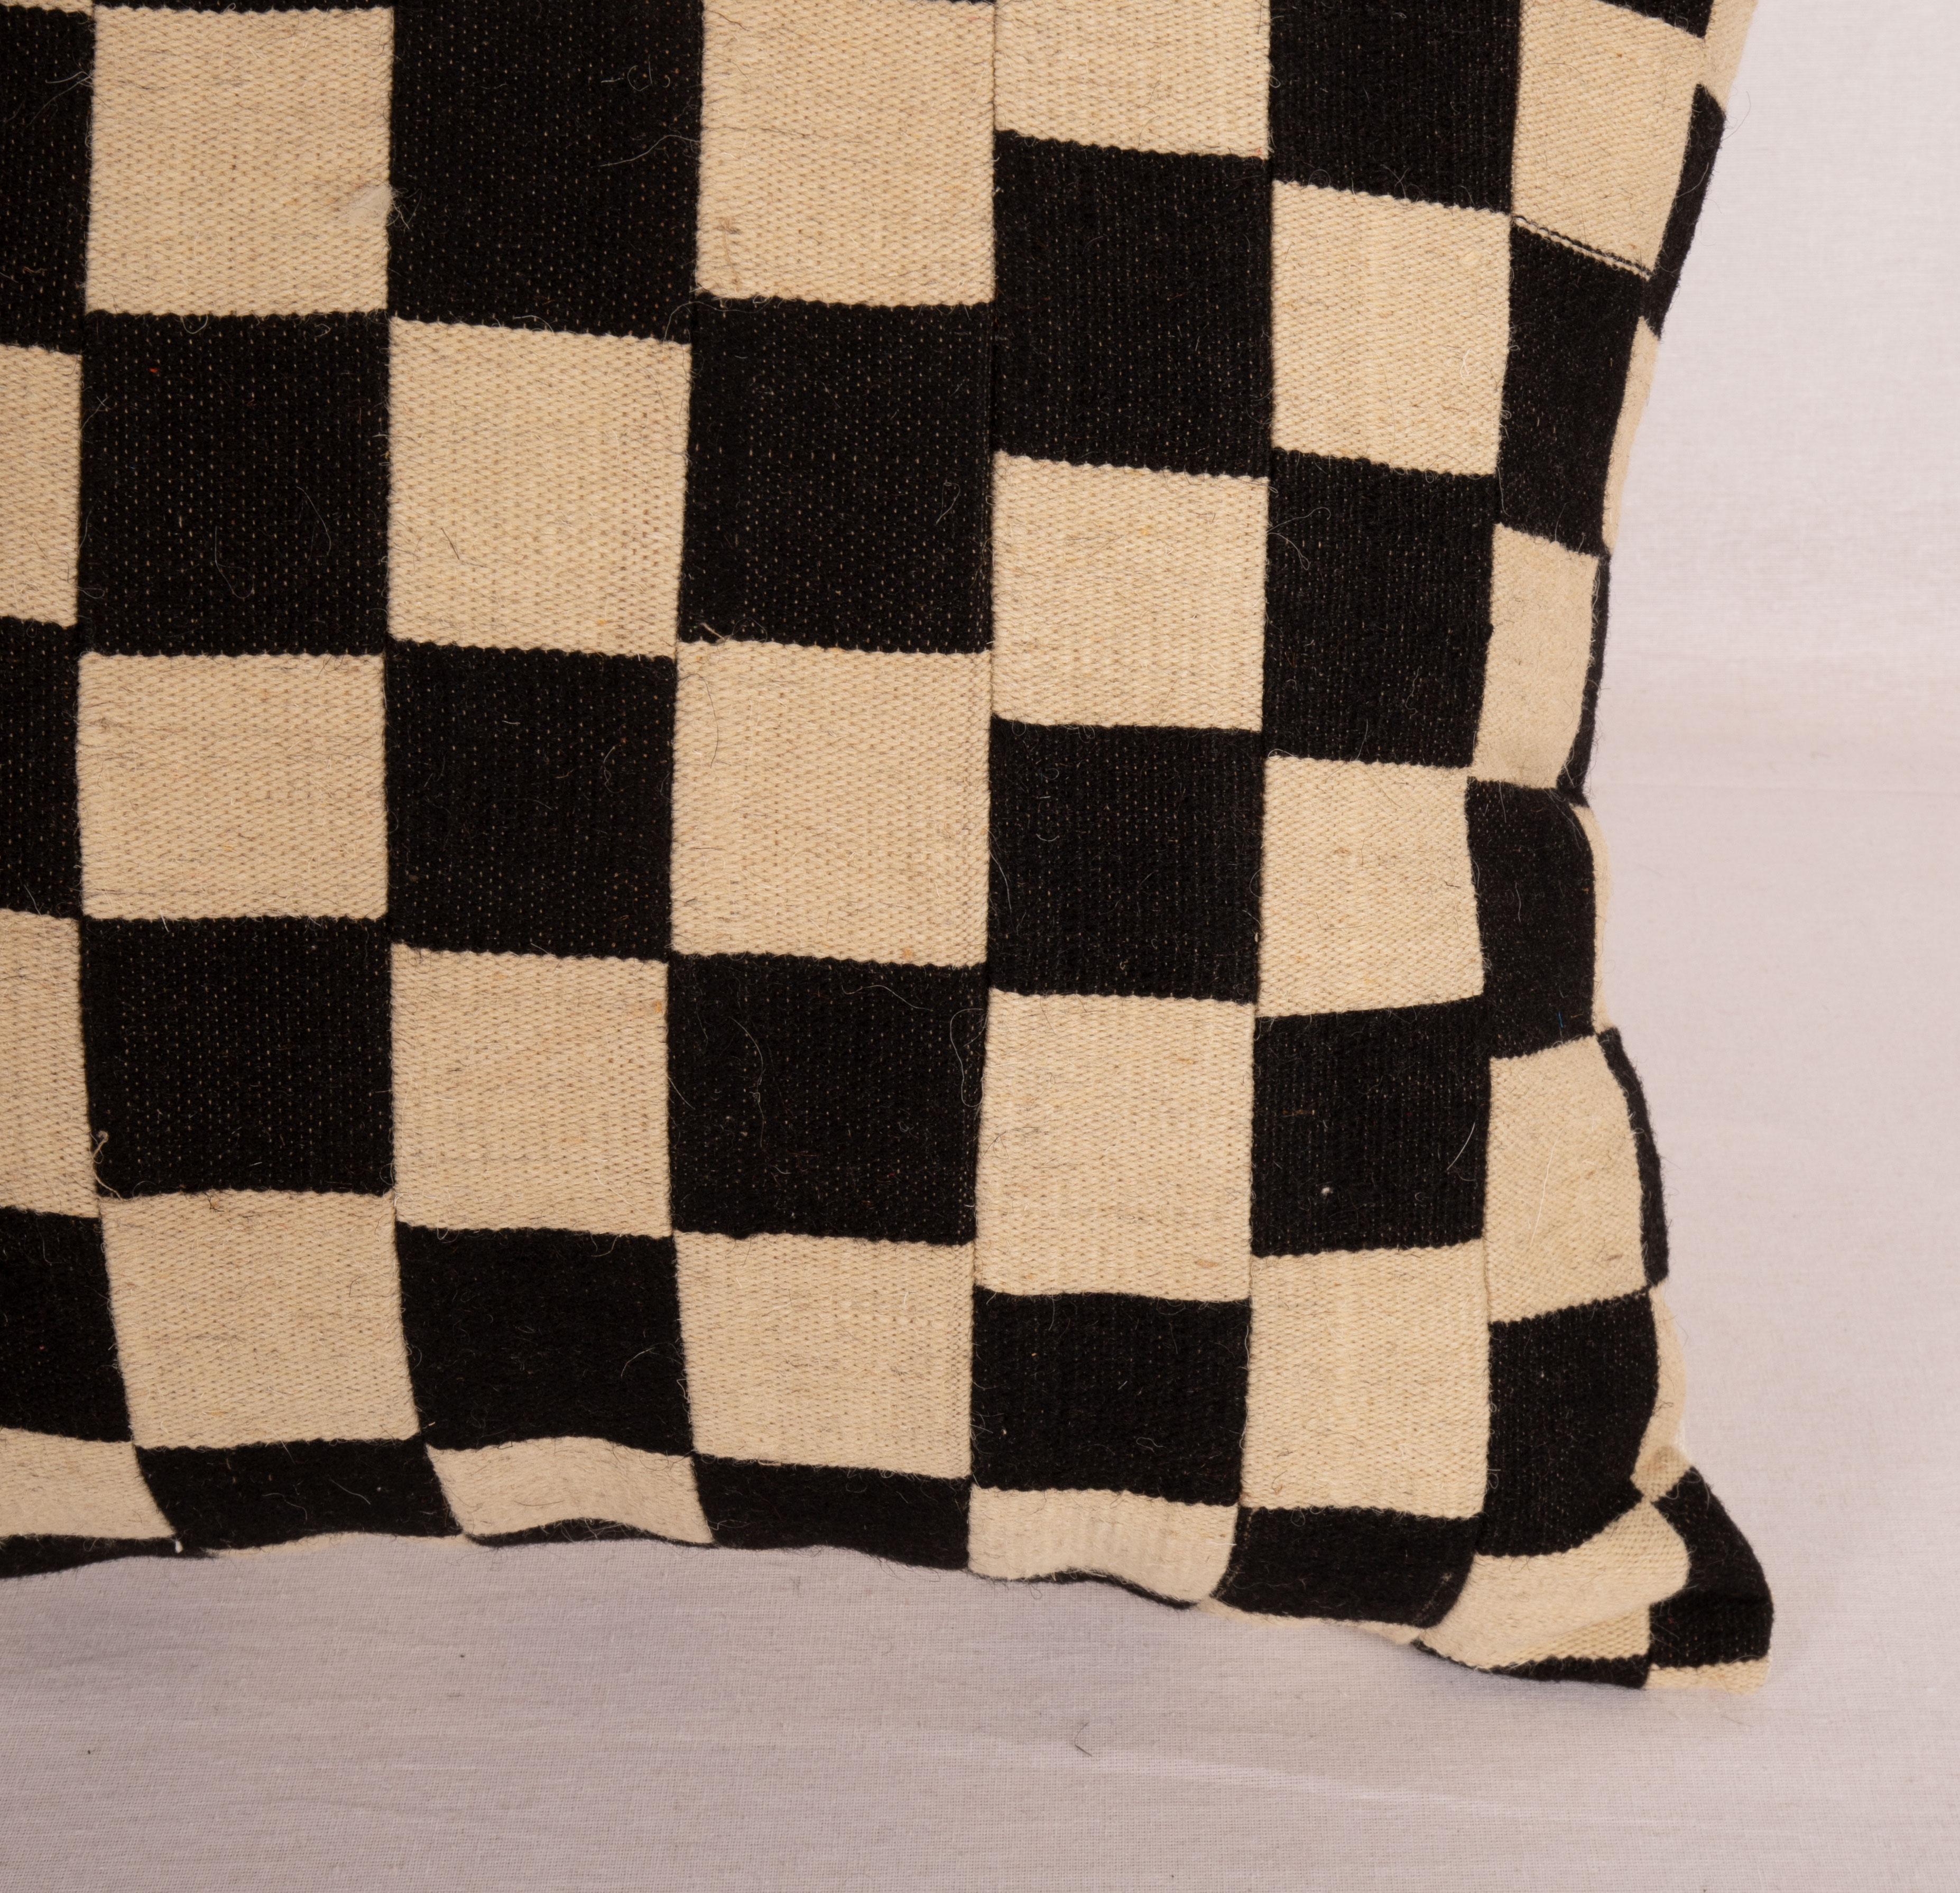 Hand-Woven Pillow Case Made from a Contemporary Hand Loomed Wool Fabric For Sale